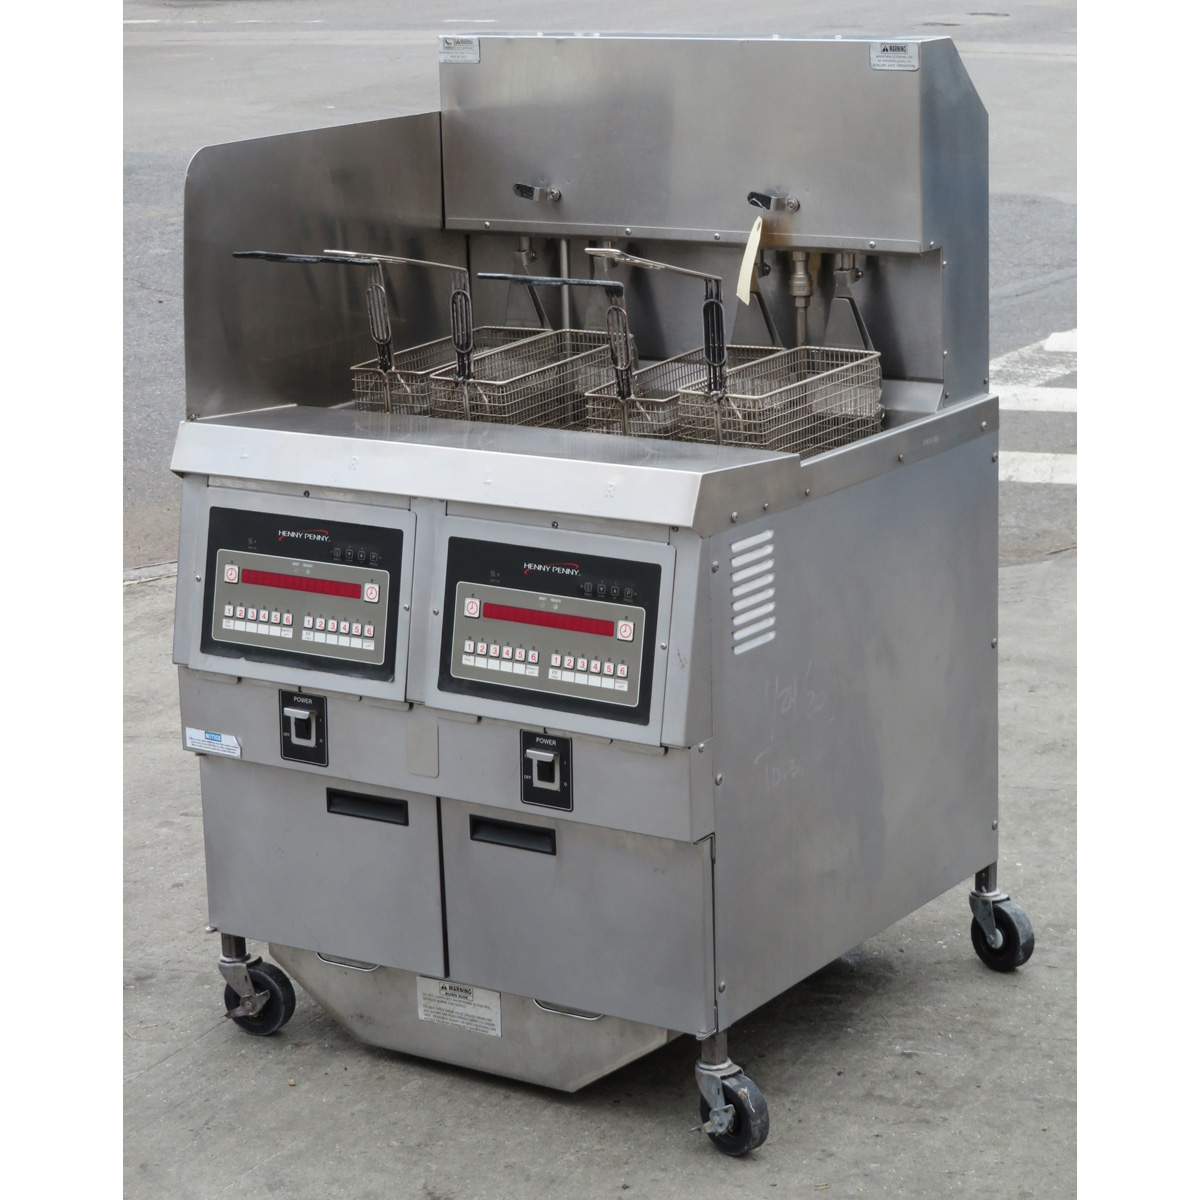 Henny Penny OGA-322 Natural Gas 2 Bank Fryer, Used Great Condition